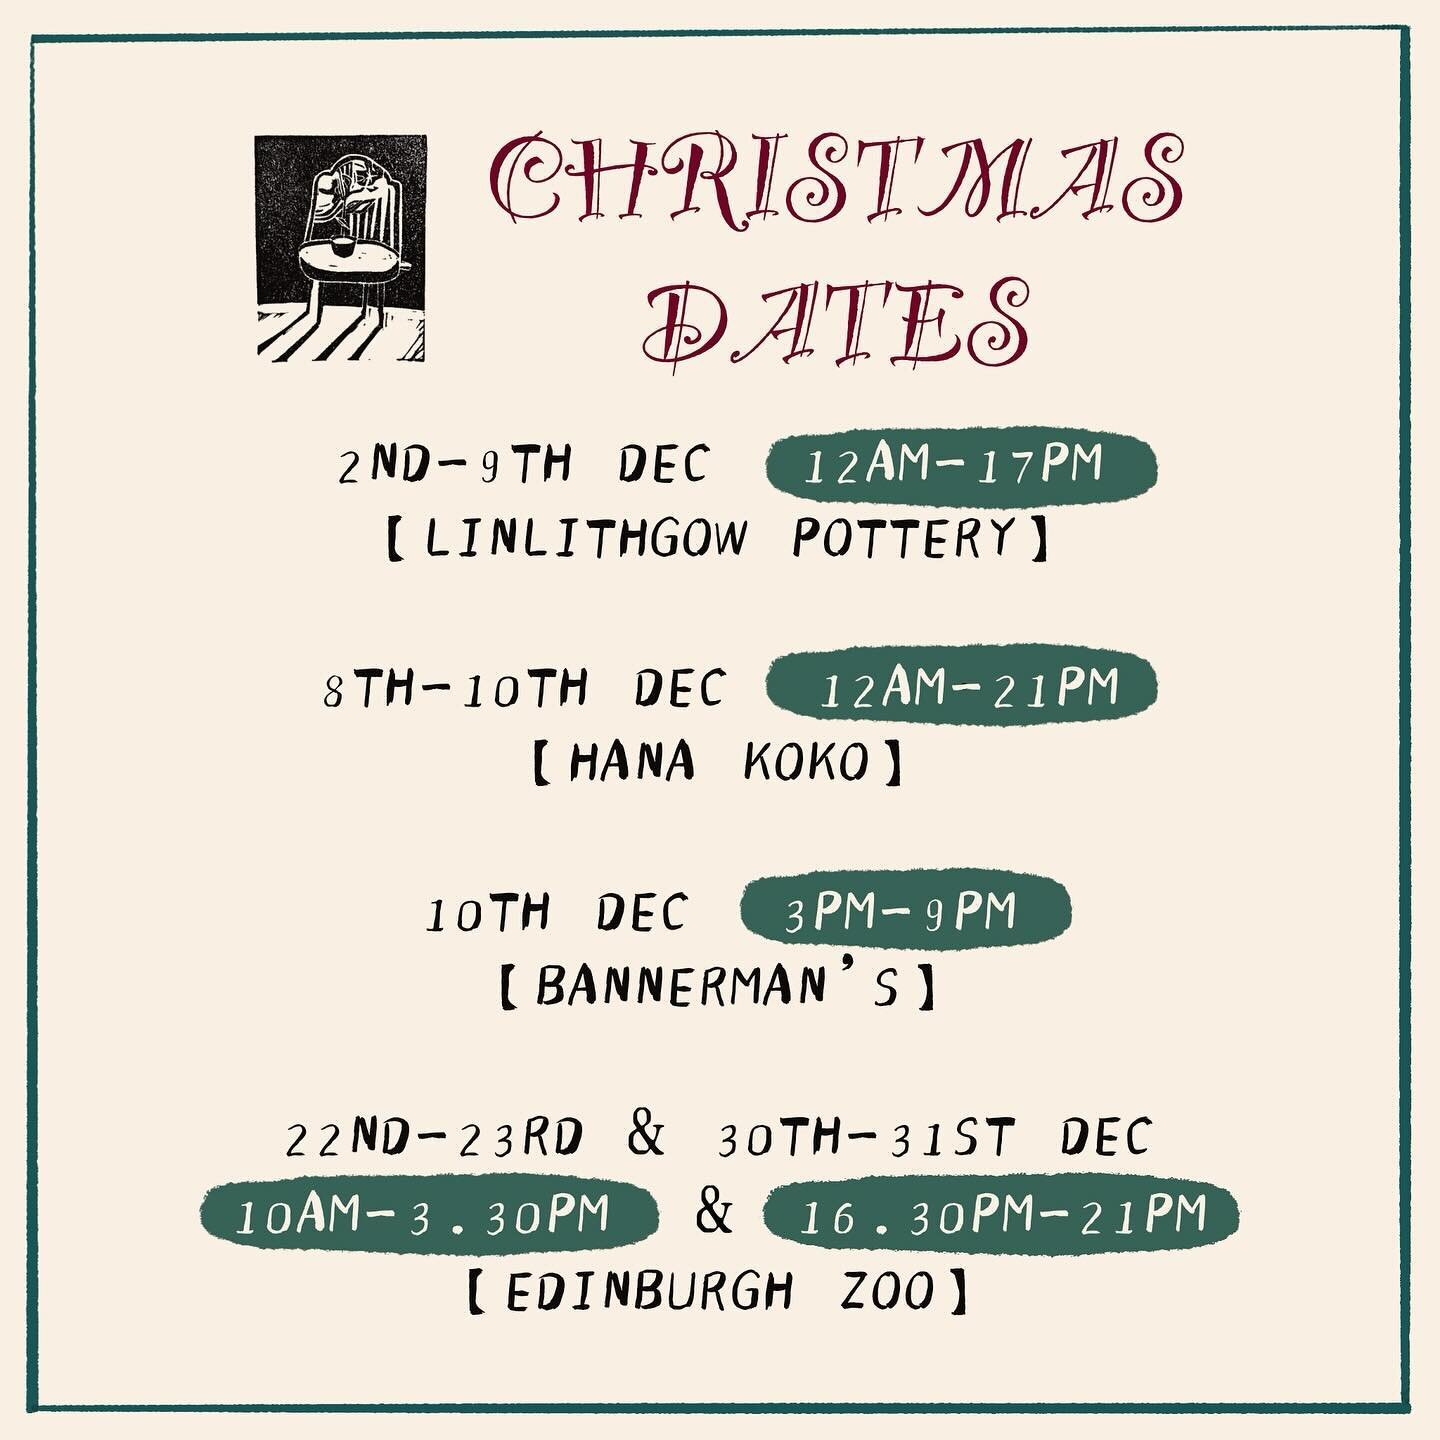 Shows &amp; Fairs my work will be exhibited and available to buy this December.  There&rsquo;ll also be other brilliant artists and great food&amp;drink. Drop by and pick up something special for your loved ones :)

#edinburghchristmasmarket #edinbur